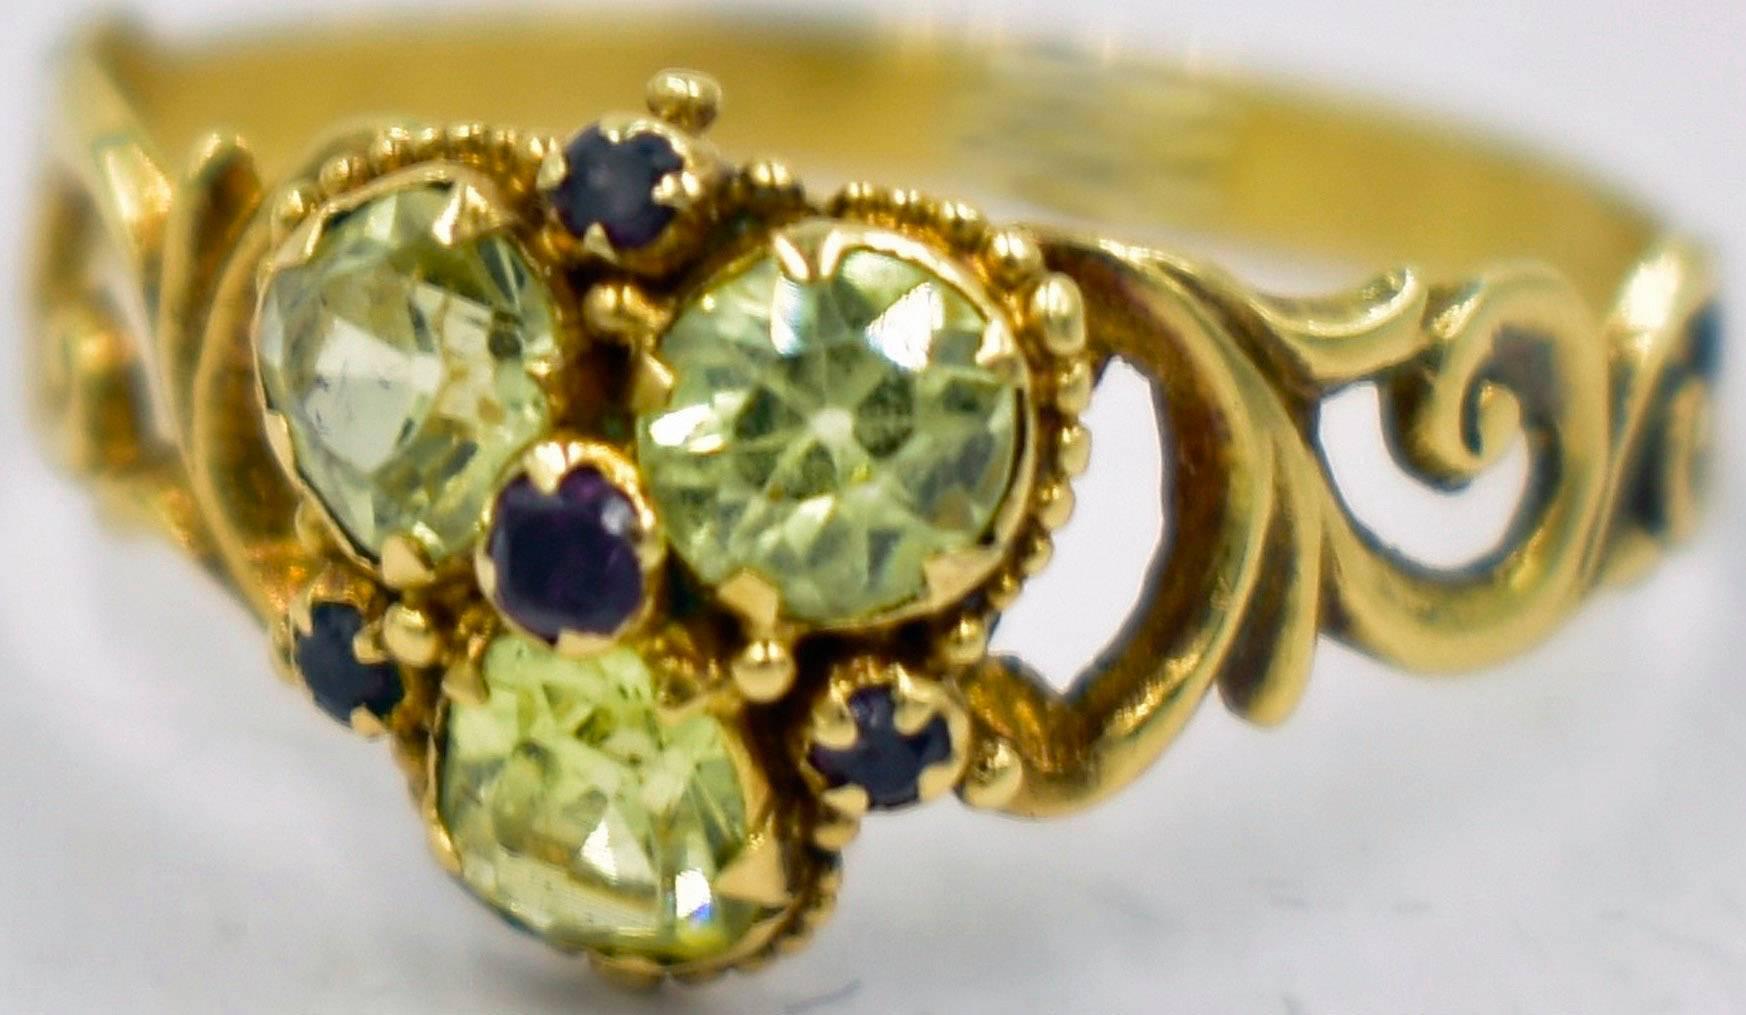 Sparkling Georgian chrysoberyl ring with four small garnets highlighting the design. The stones are in a beautiful swirling setting of 15K gold. The back of the band is decorated with an engraved floral and leaf design. The ring is a size 6 1/2 and